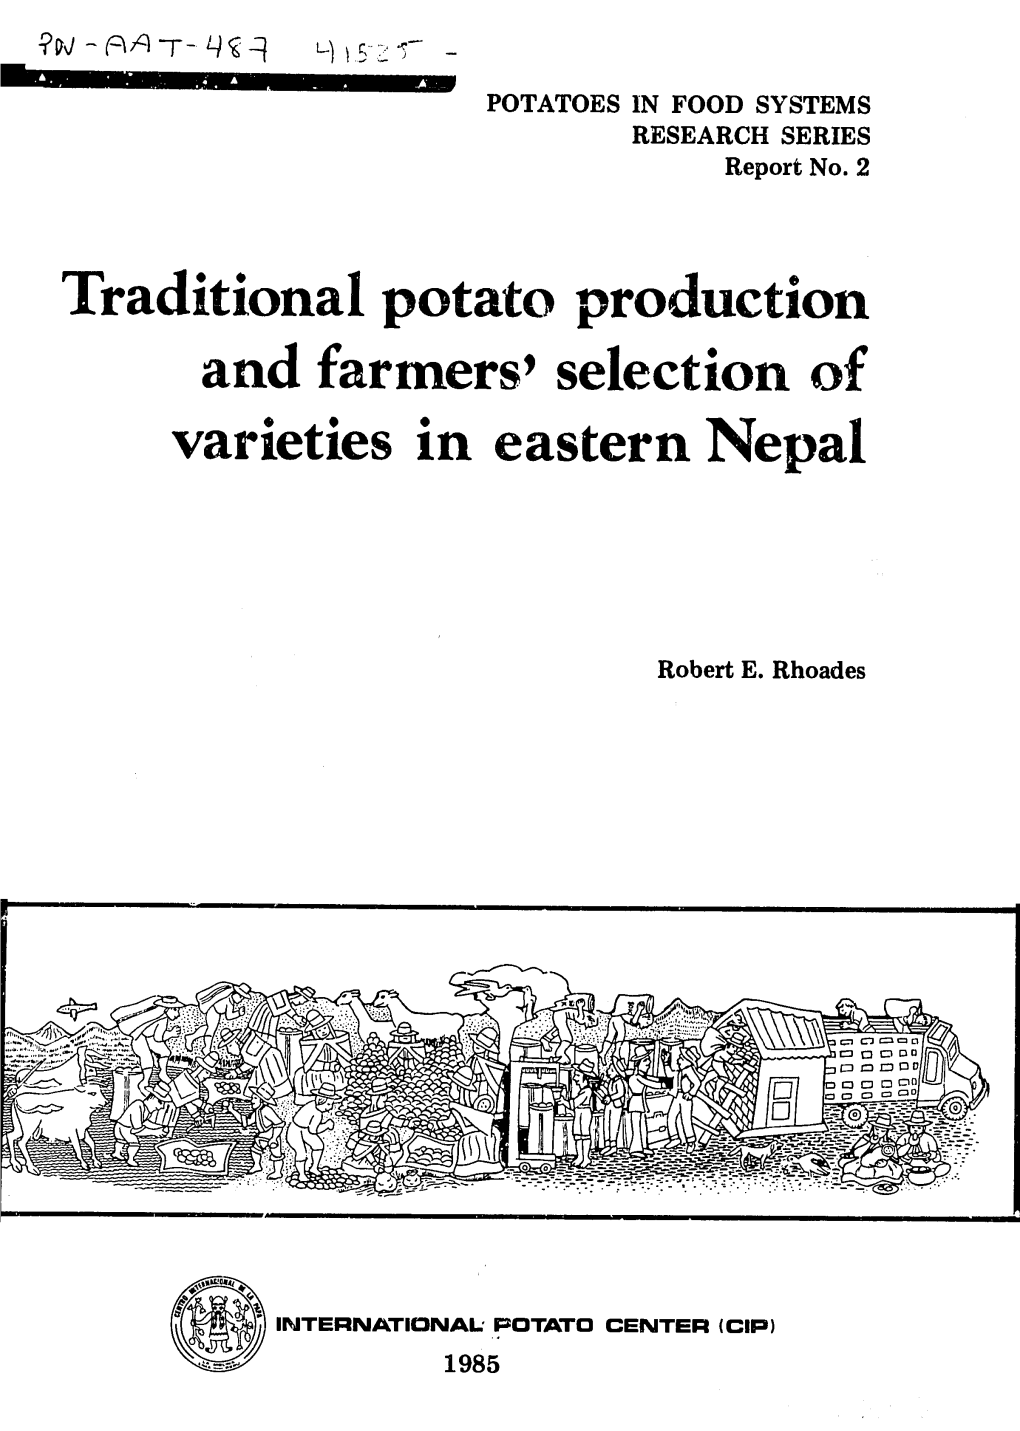 Traditional Potato Production and Farmers' Selection of Varieties in Eastern Nepal